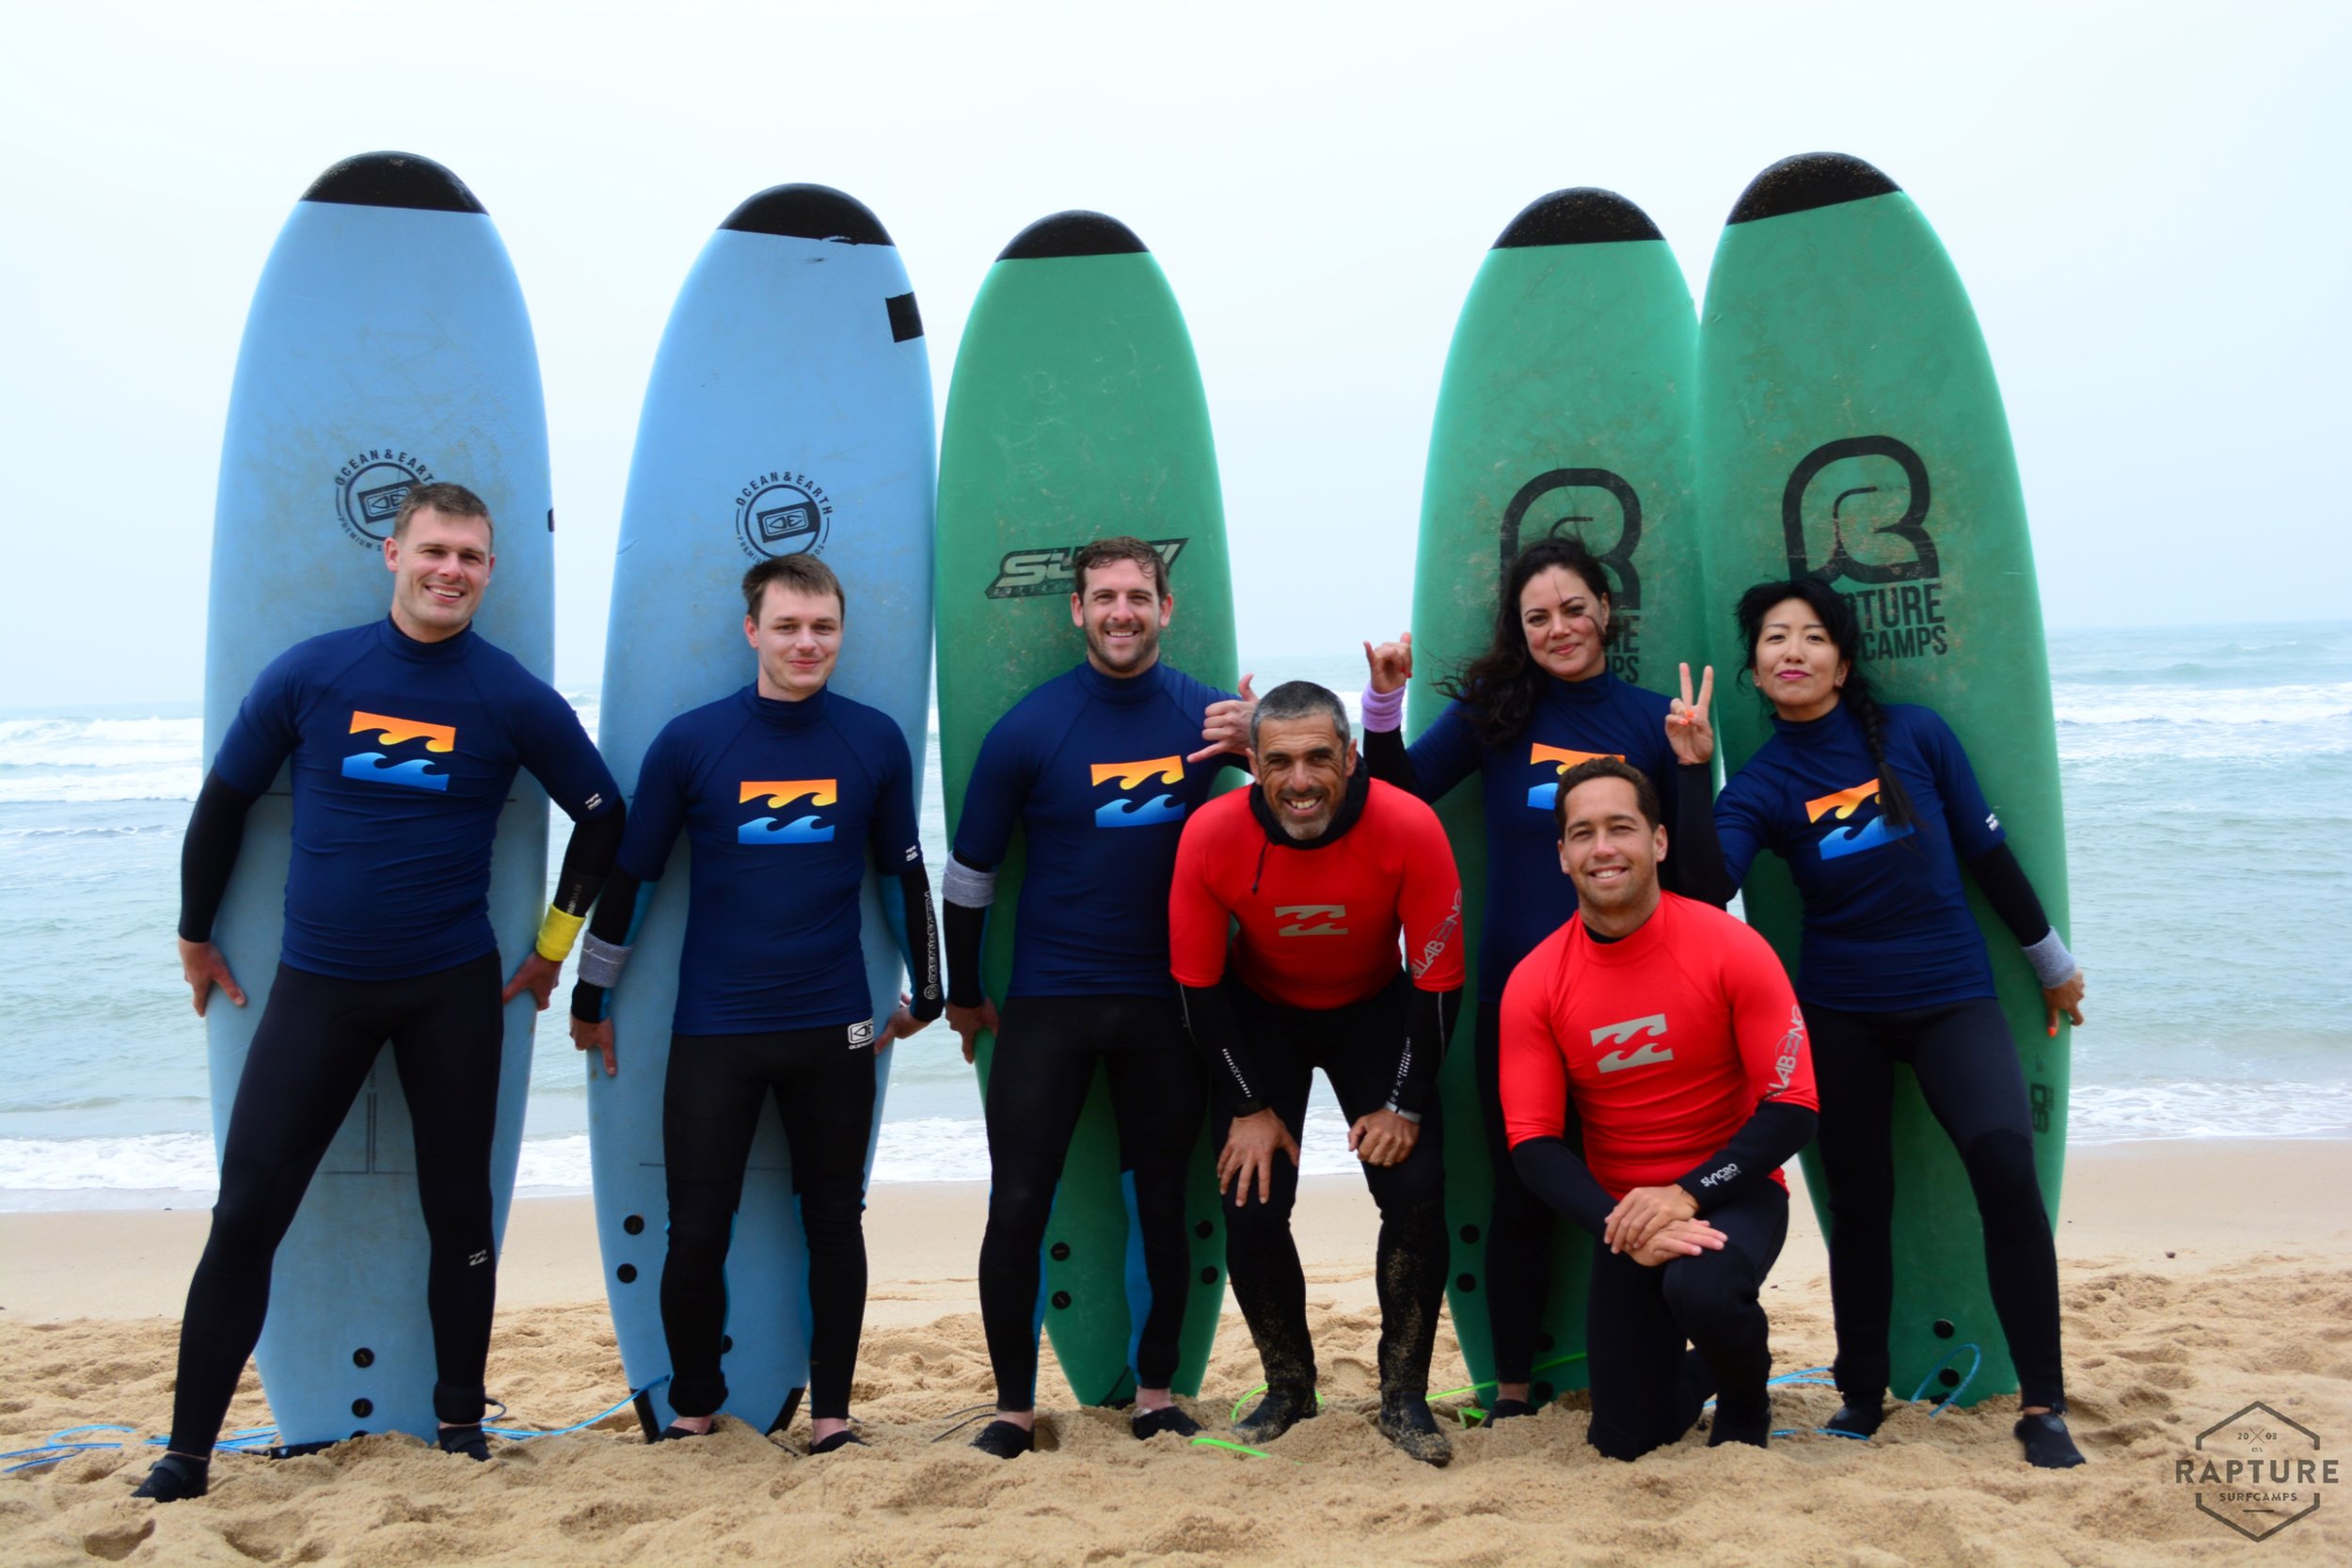 With our surf instructors 